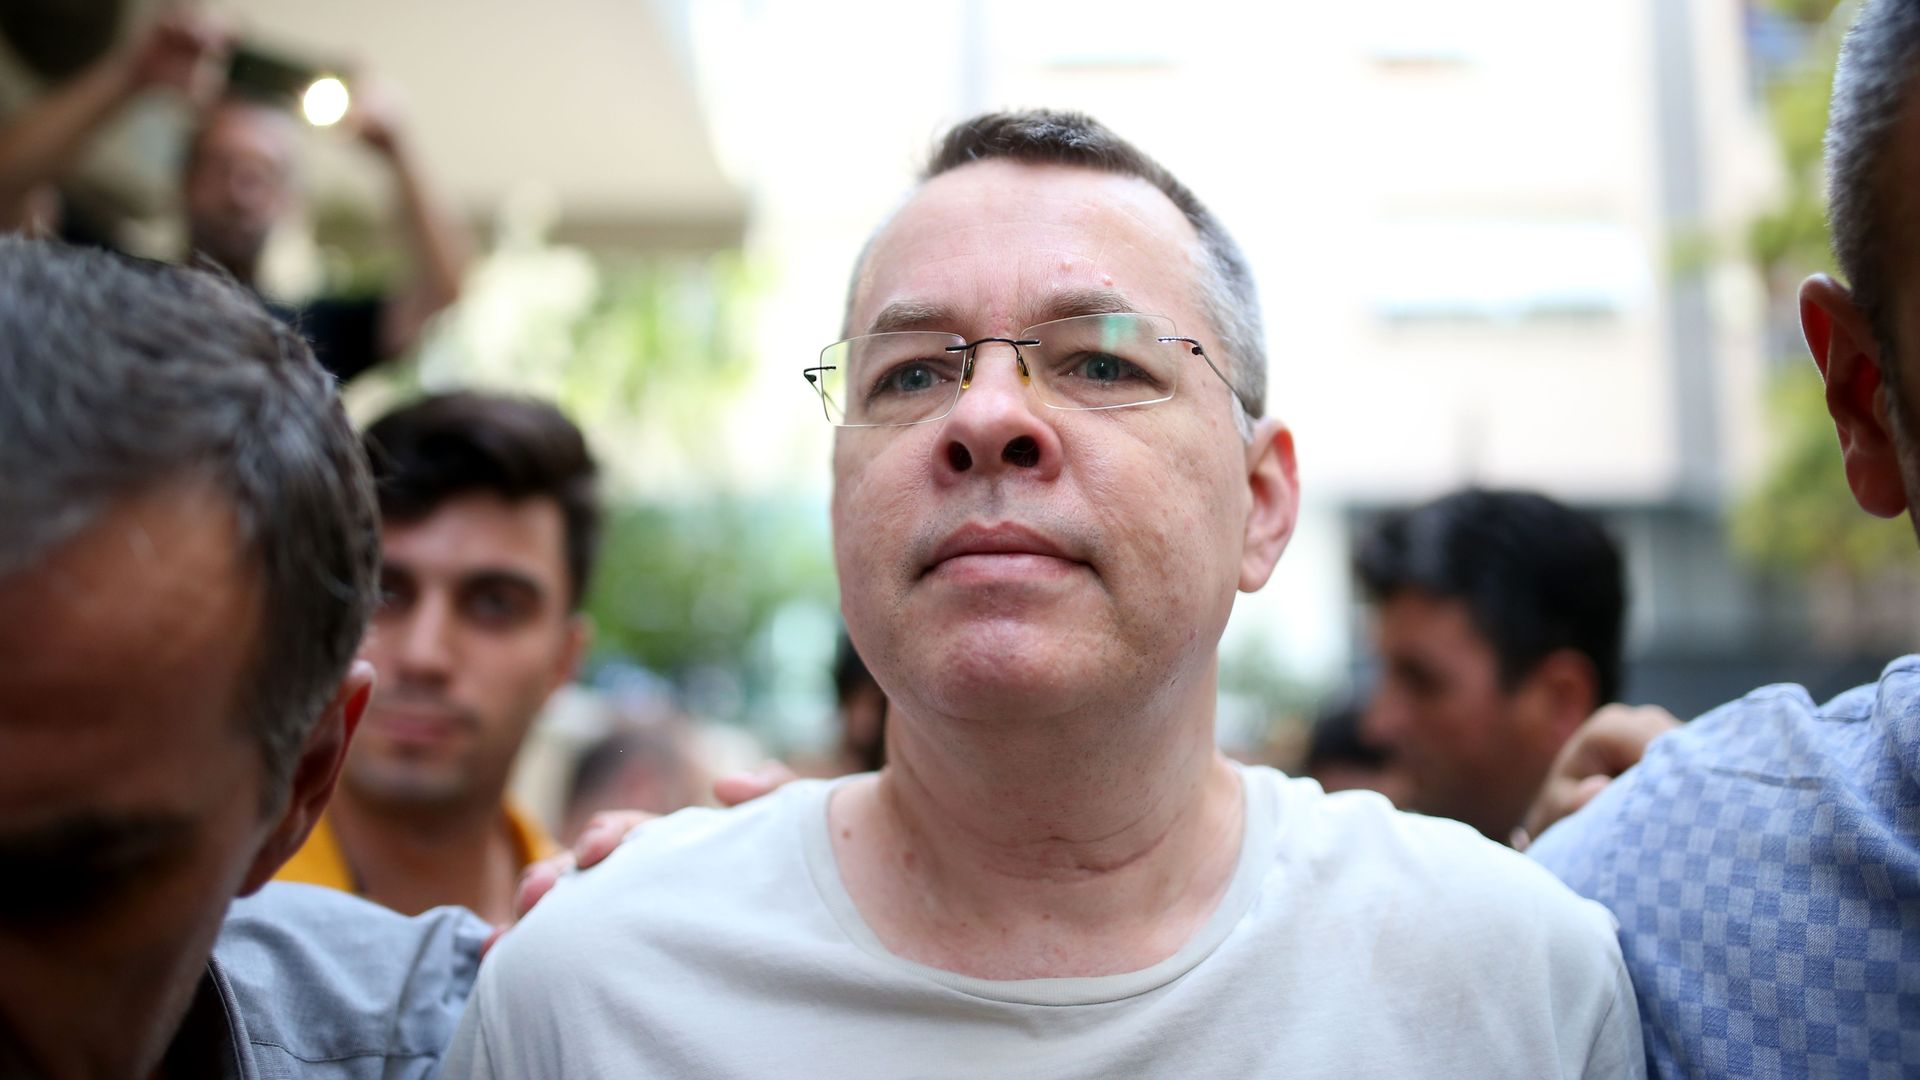 Pastor Andrew Craig Brunson being escorted by Turkish police officers. Photo: Stringer/AFP/Getty Images